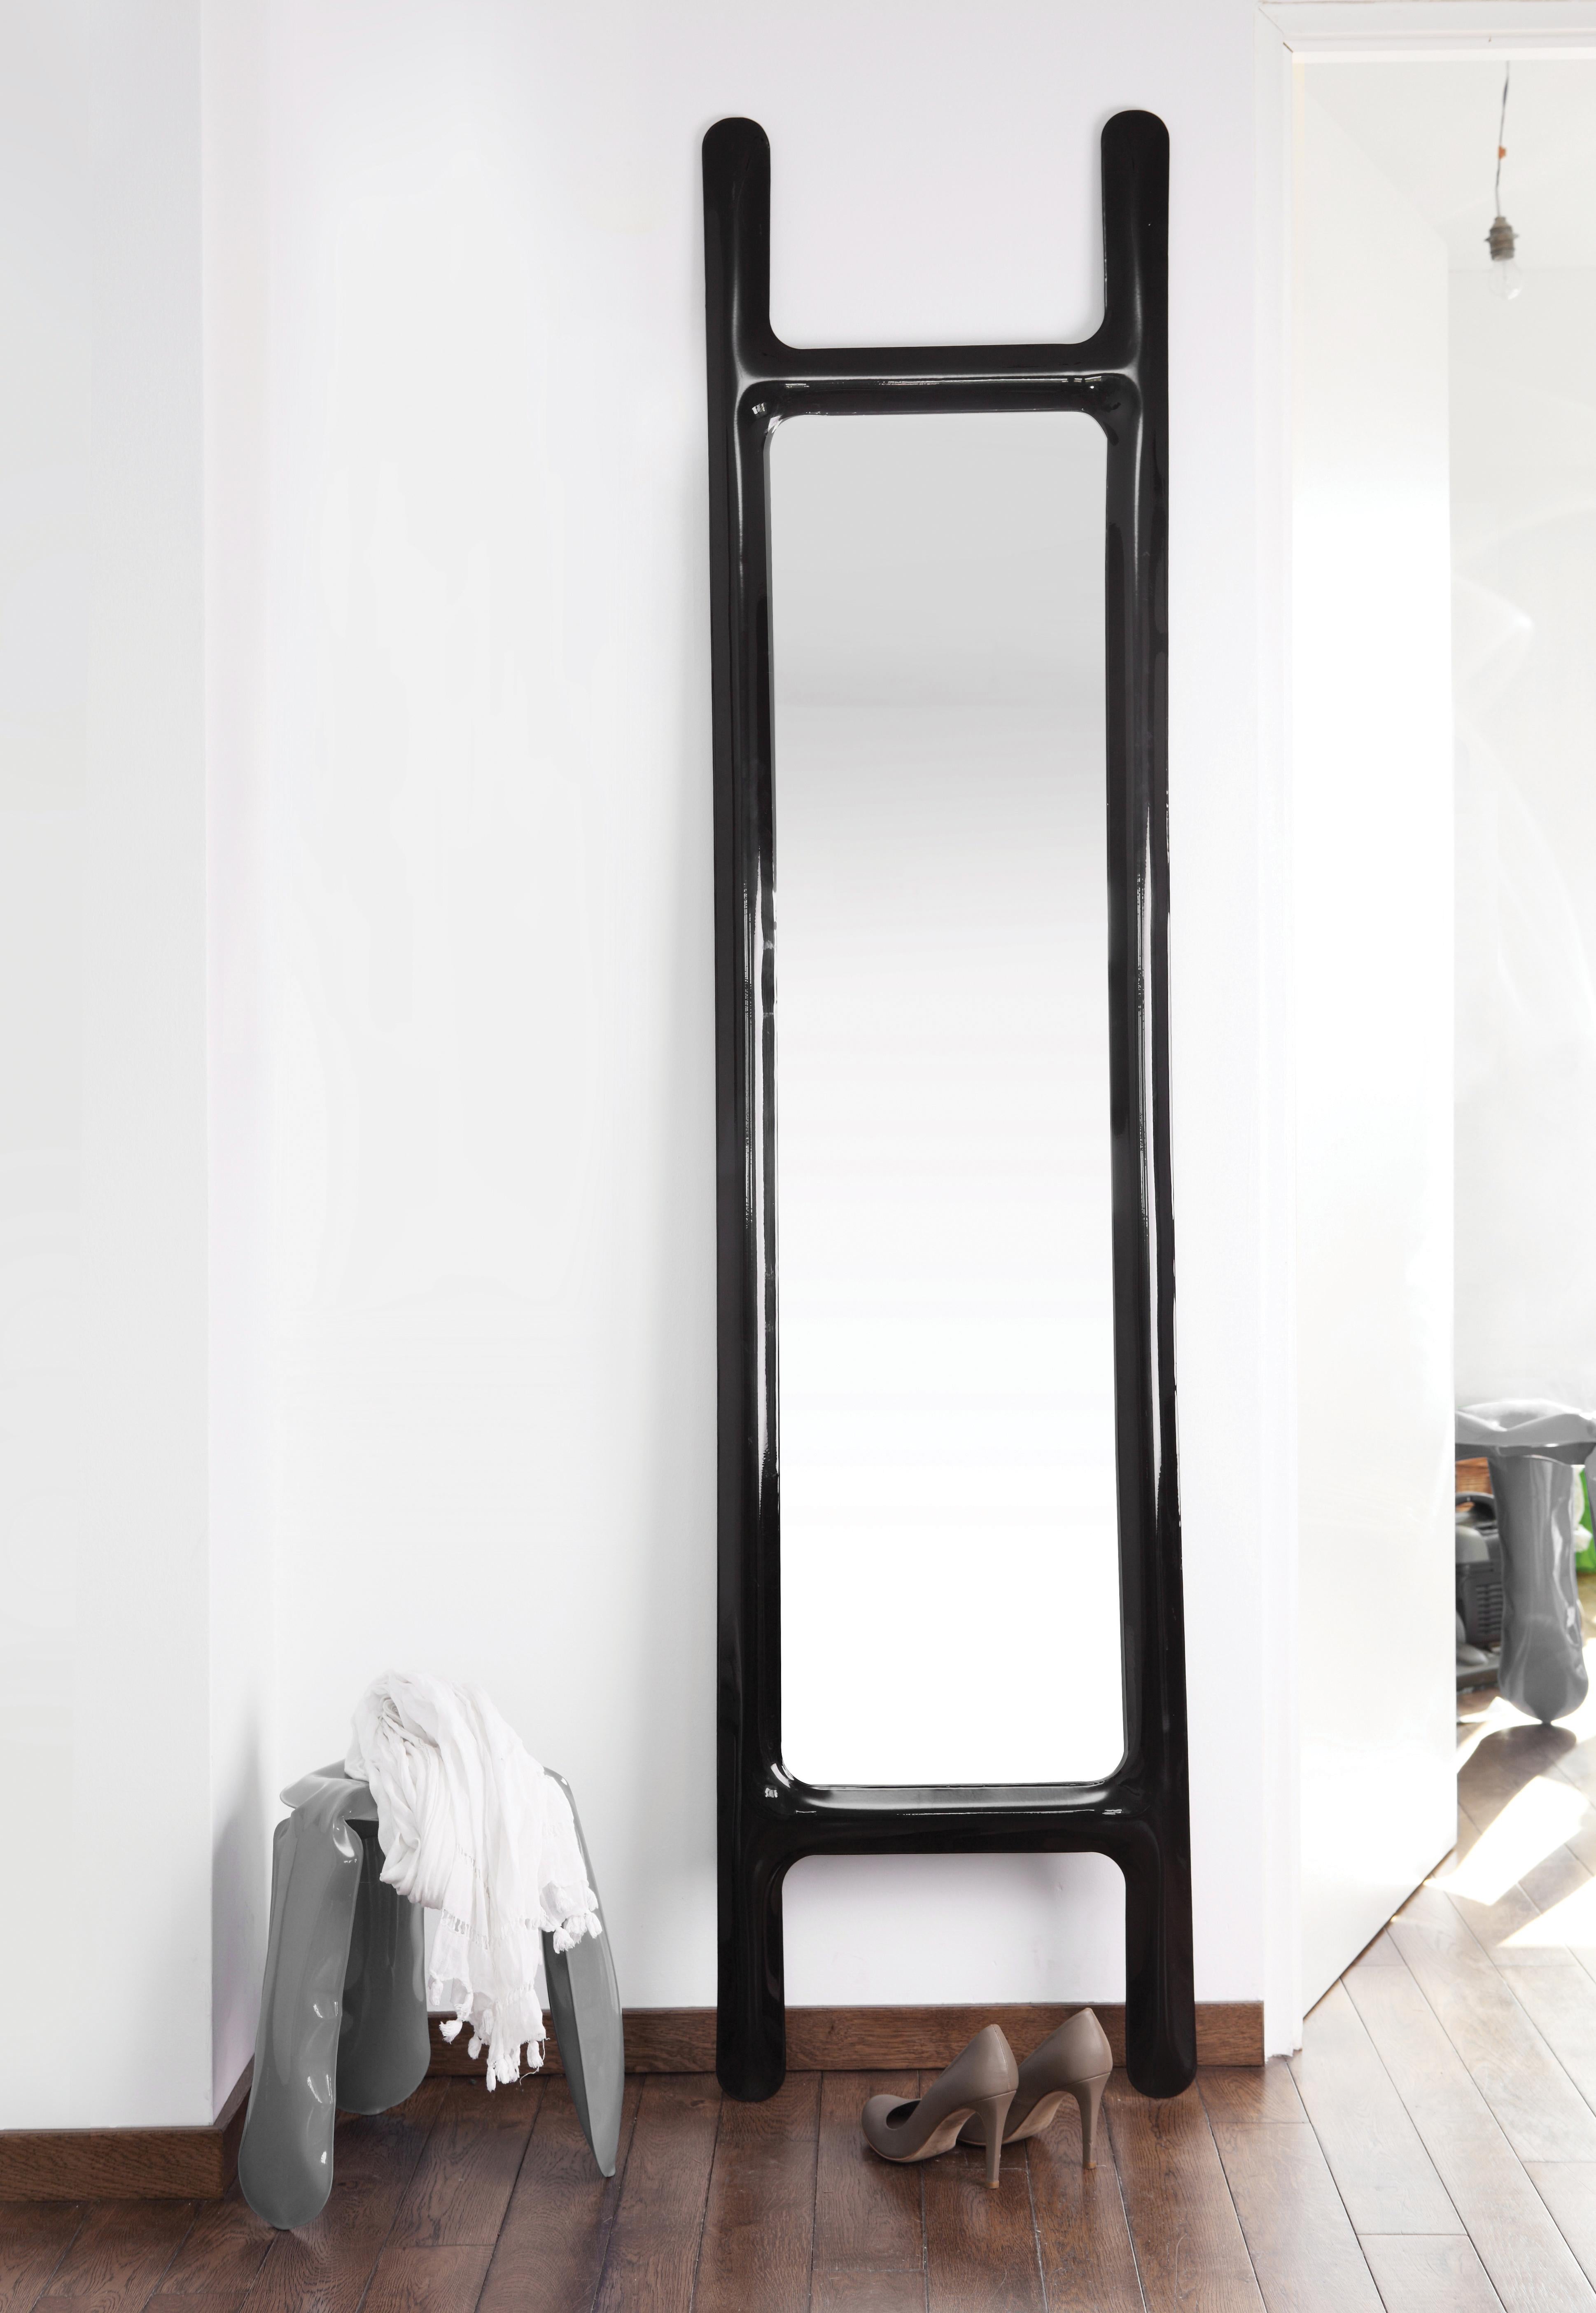 Drab mirror is a part of a drab ladder family, adding a new function to an elegant frame created with the use of FiDU technology. The inflation effect is not so obvious, yet it is well highlighted in the convexity of this simple form.

Available in